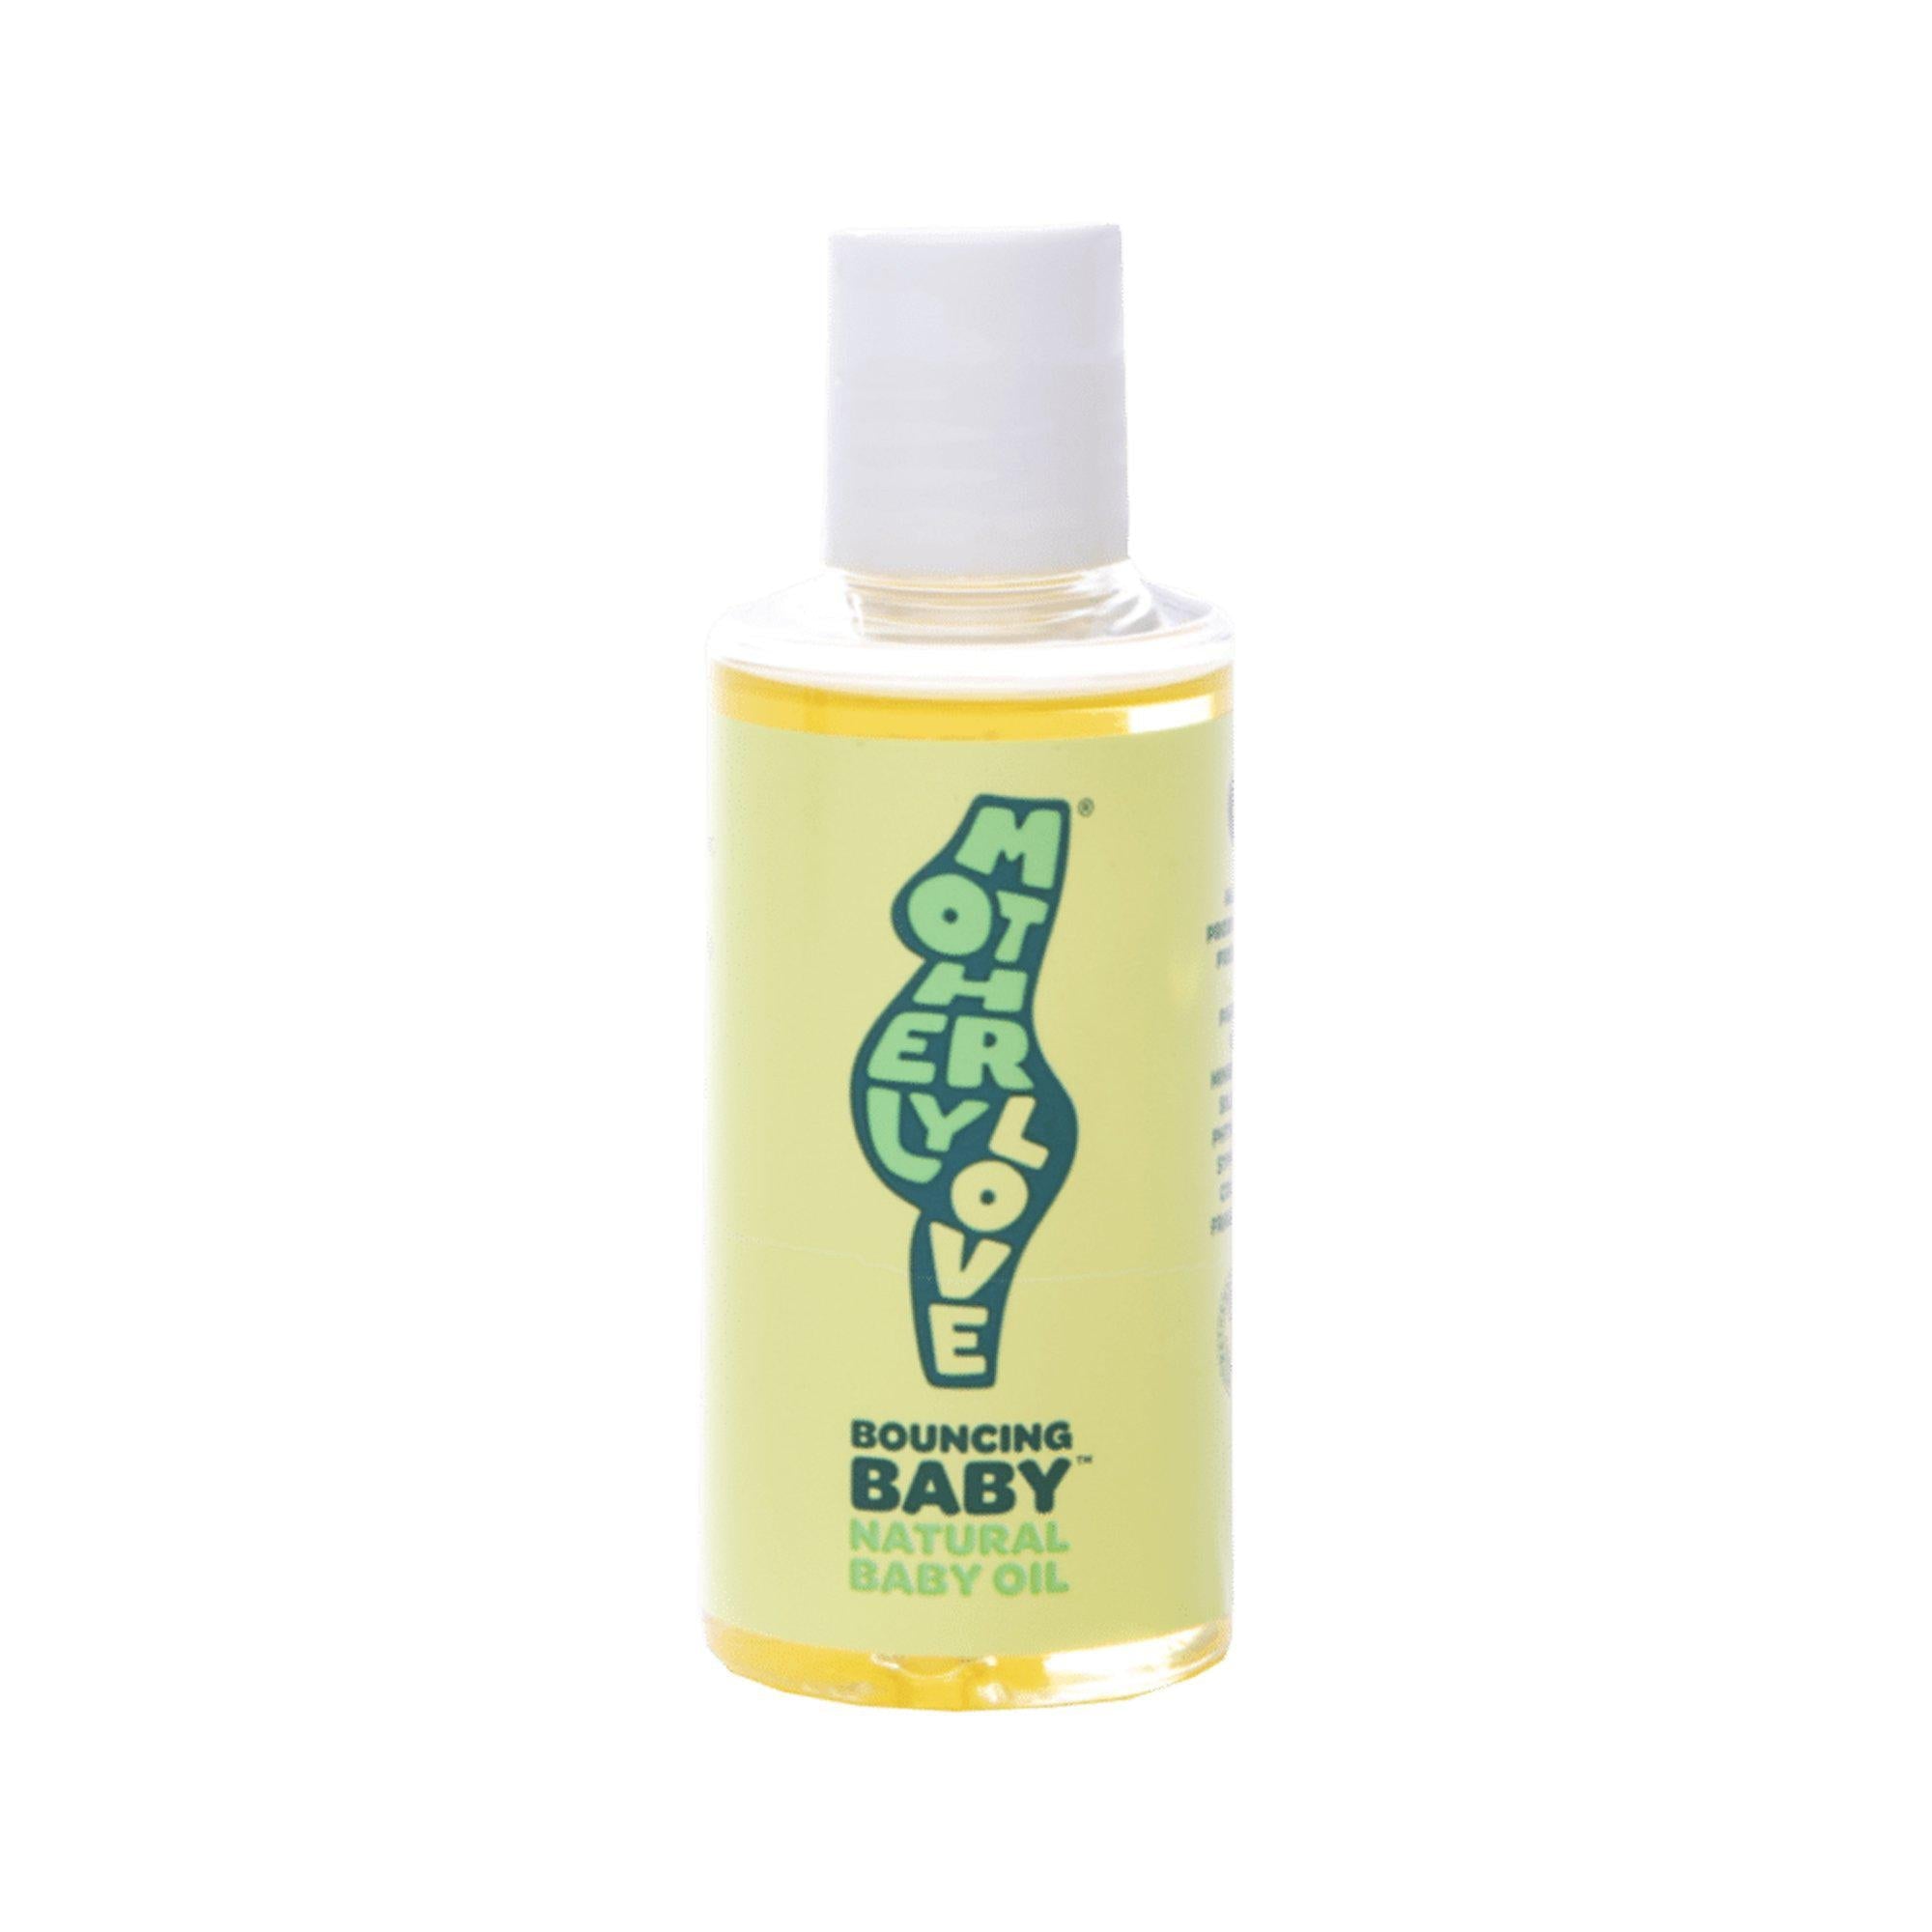 Indisponible - Huile Naturelle pour Bébé - Bouncing Baby Unavailable - Natural Baby Oil - Bouncing Baby - Motherlylove